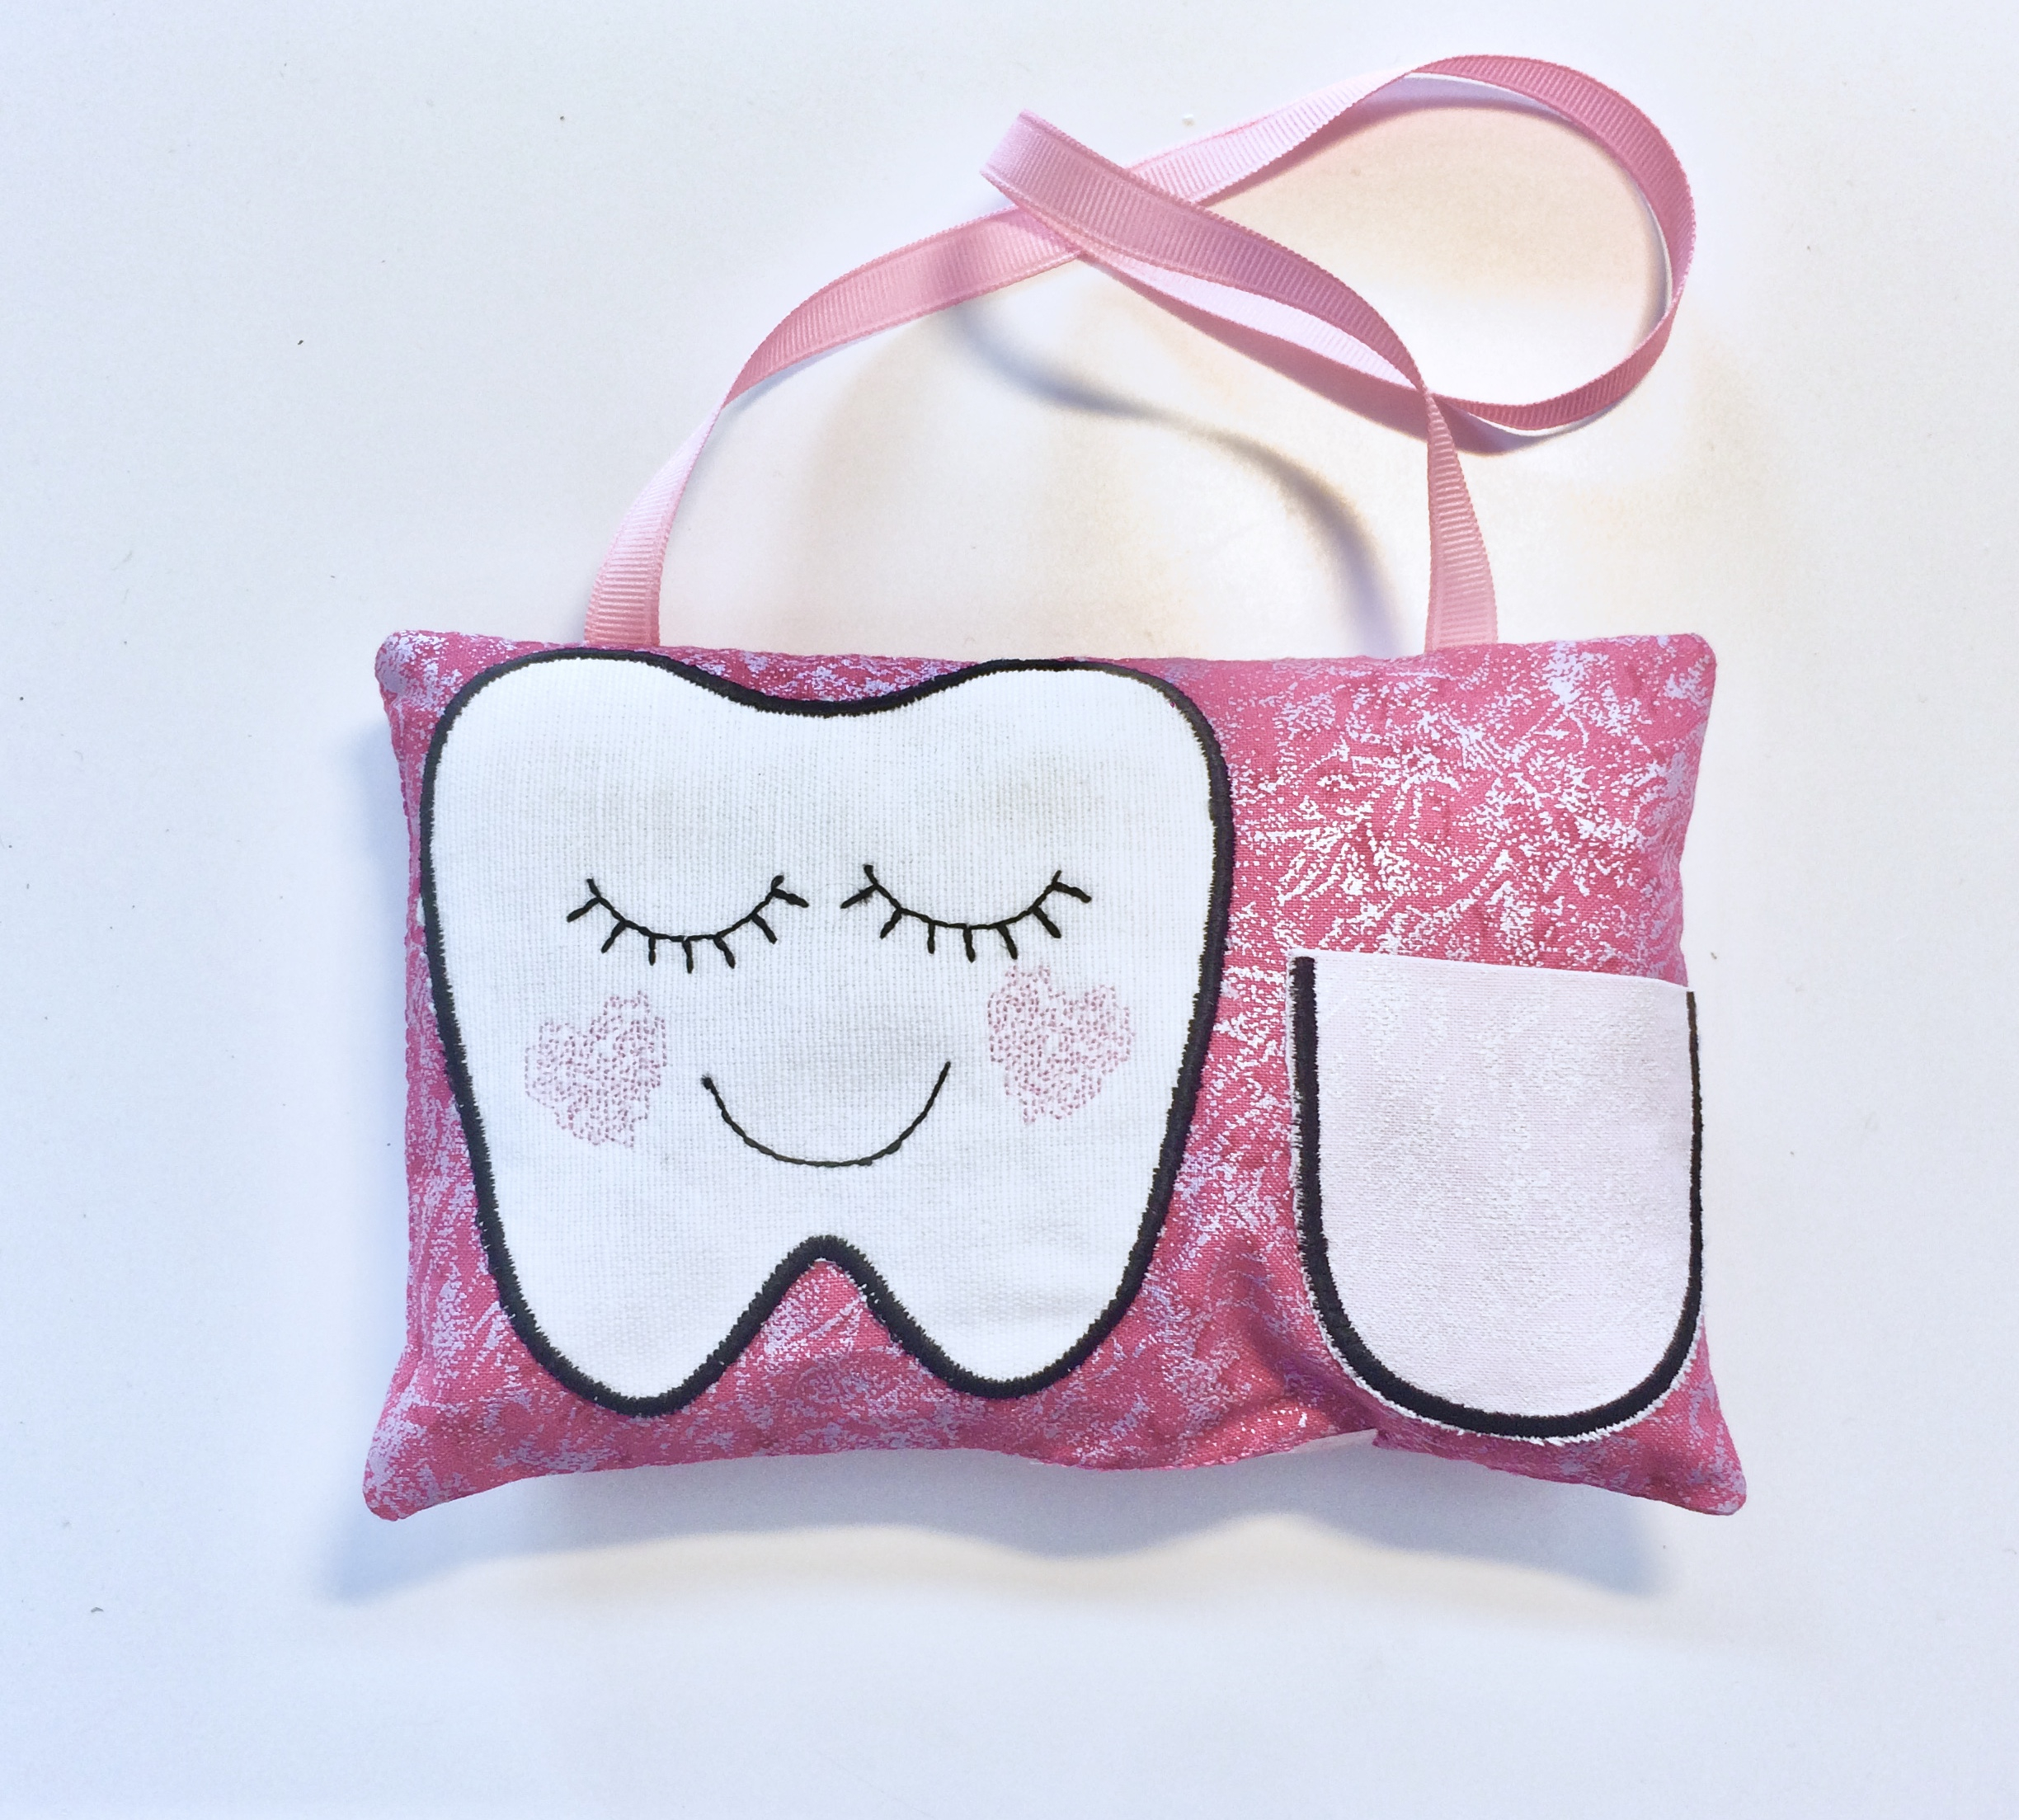 Embroidery Machine Patterns Download In The Hoop Tooth Fairy Stuffie Machine Embroidery Design Pattern5x7 Instant Download Pixie Willow Patterns Ith Tooth Fairy Pillow